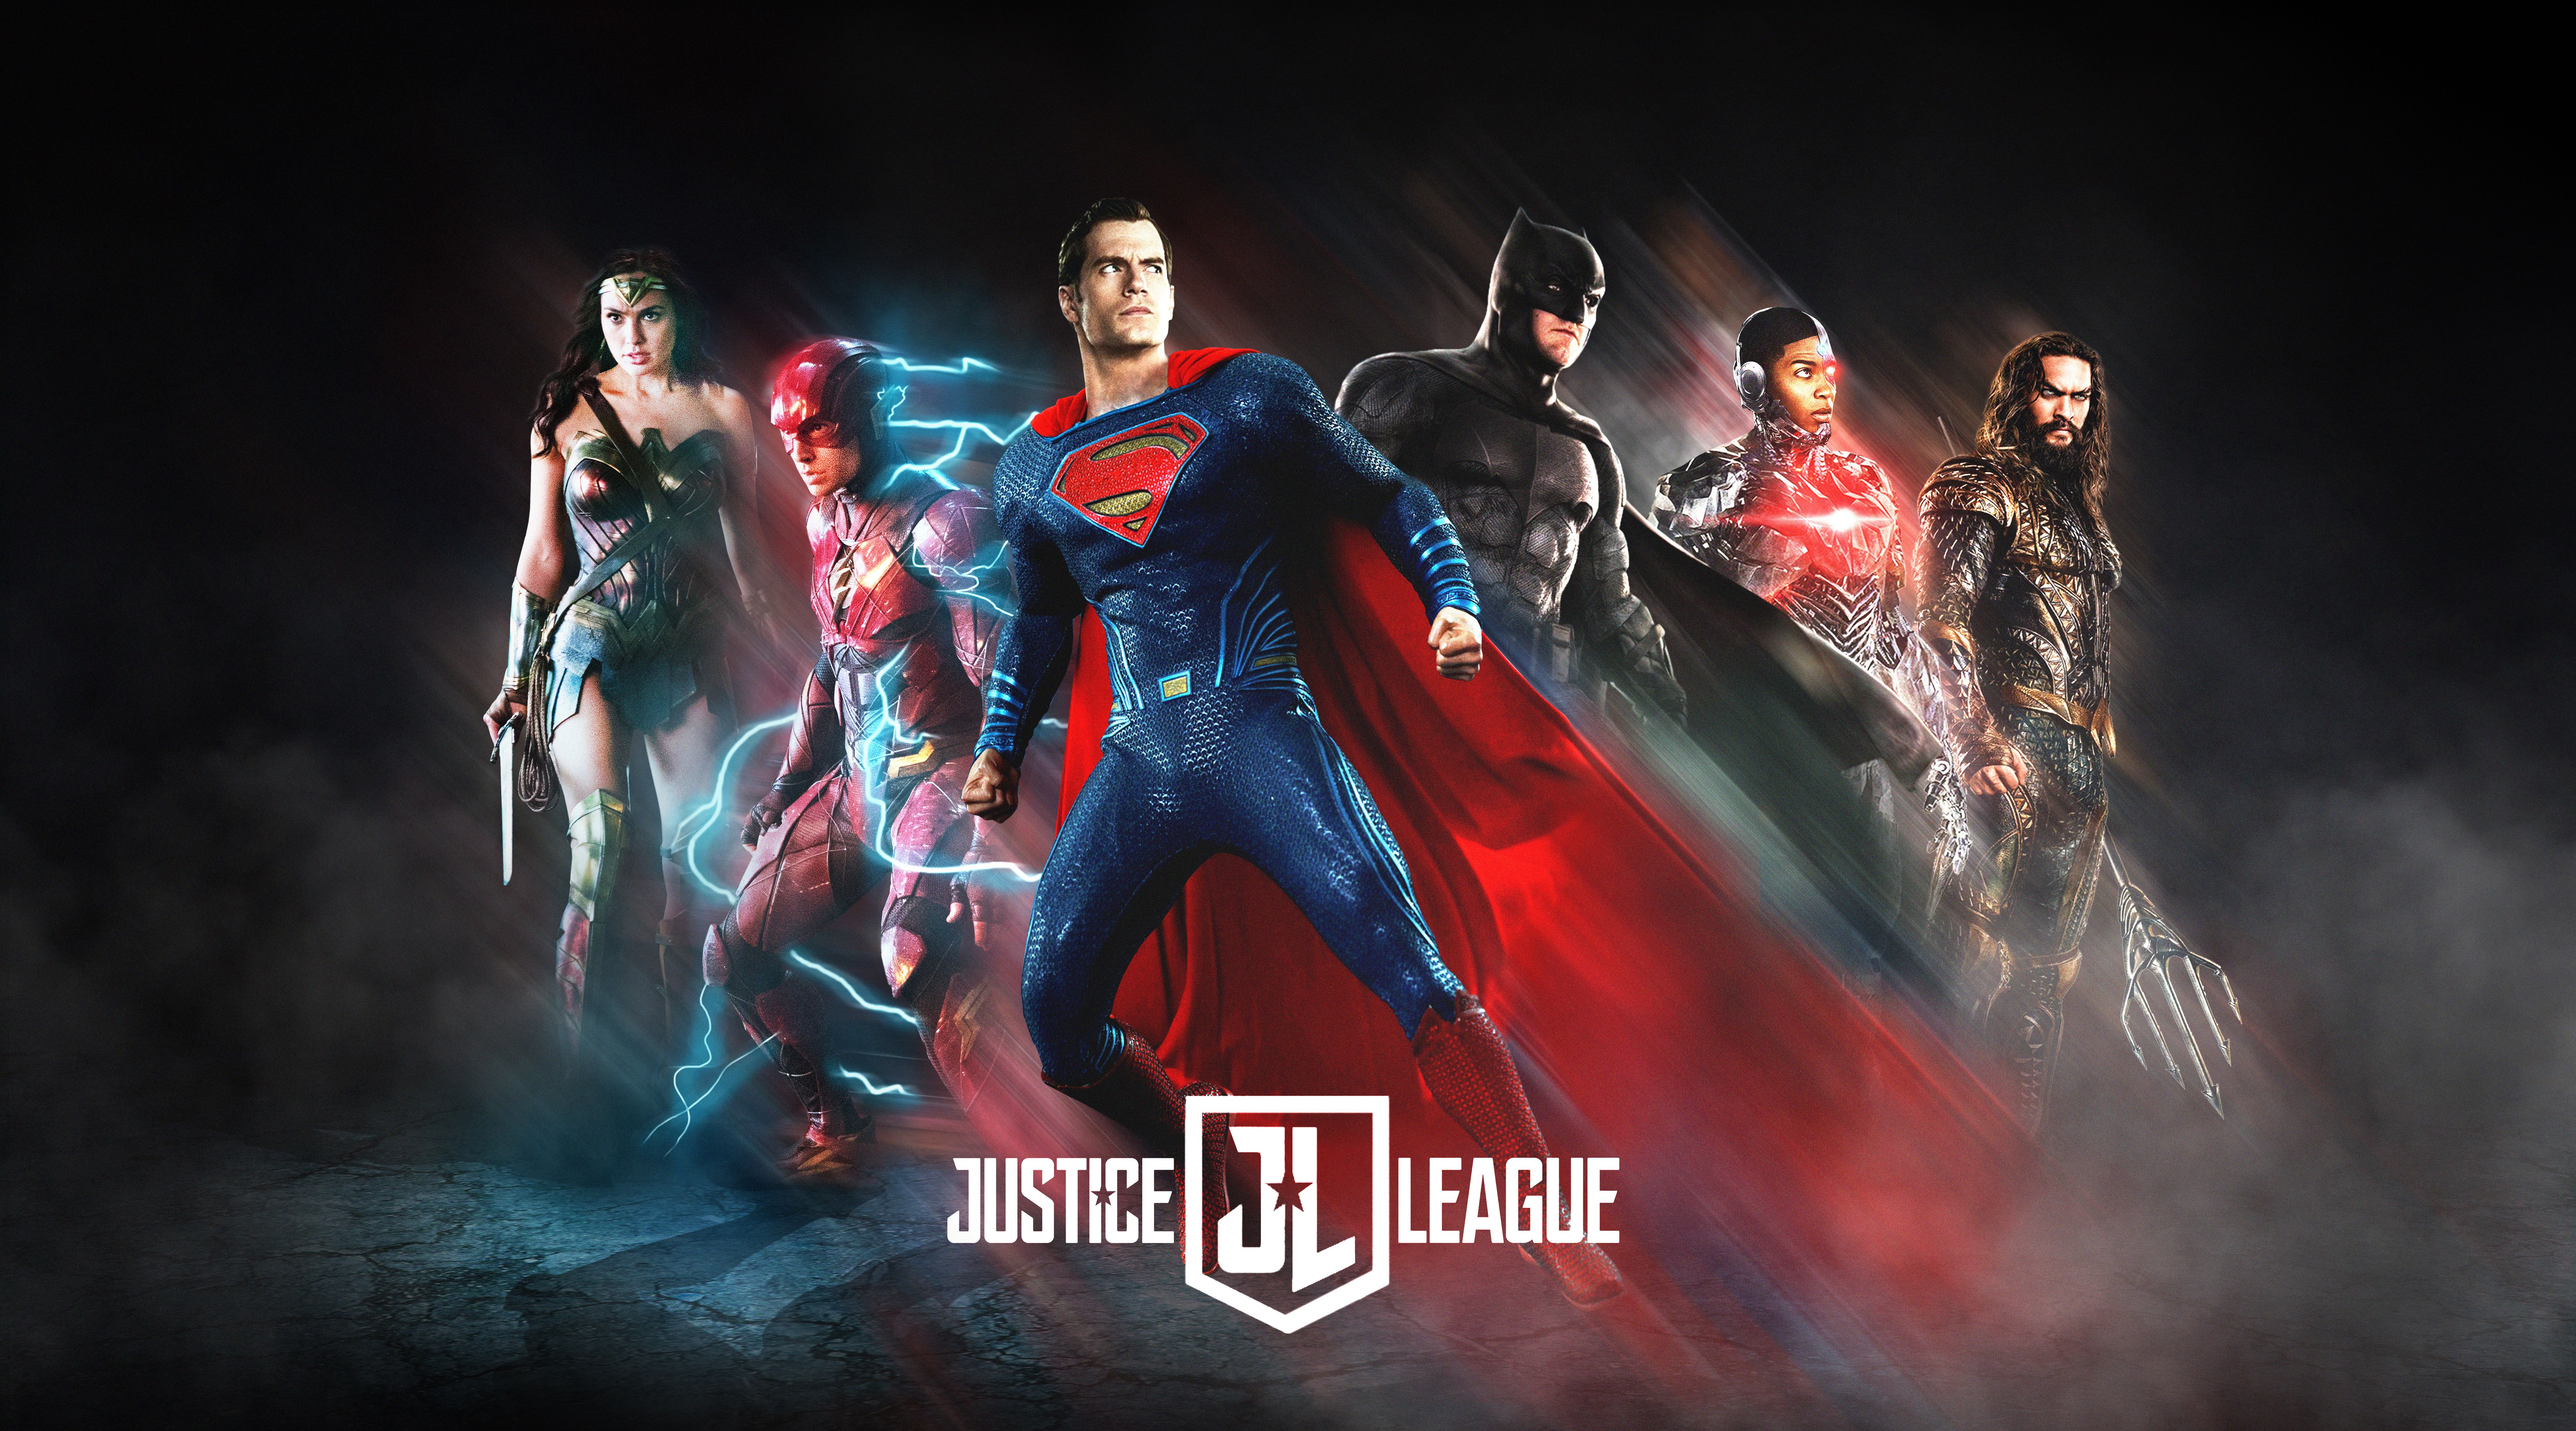 The Flash Justice League Wallpaper